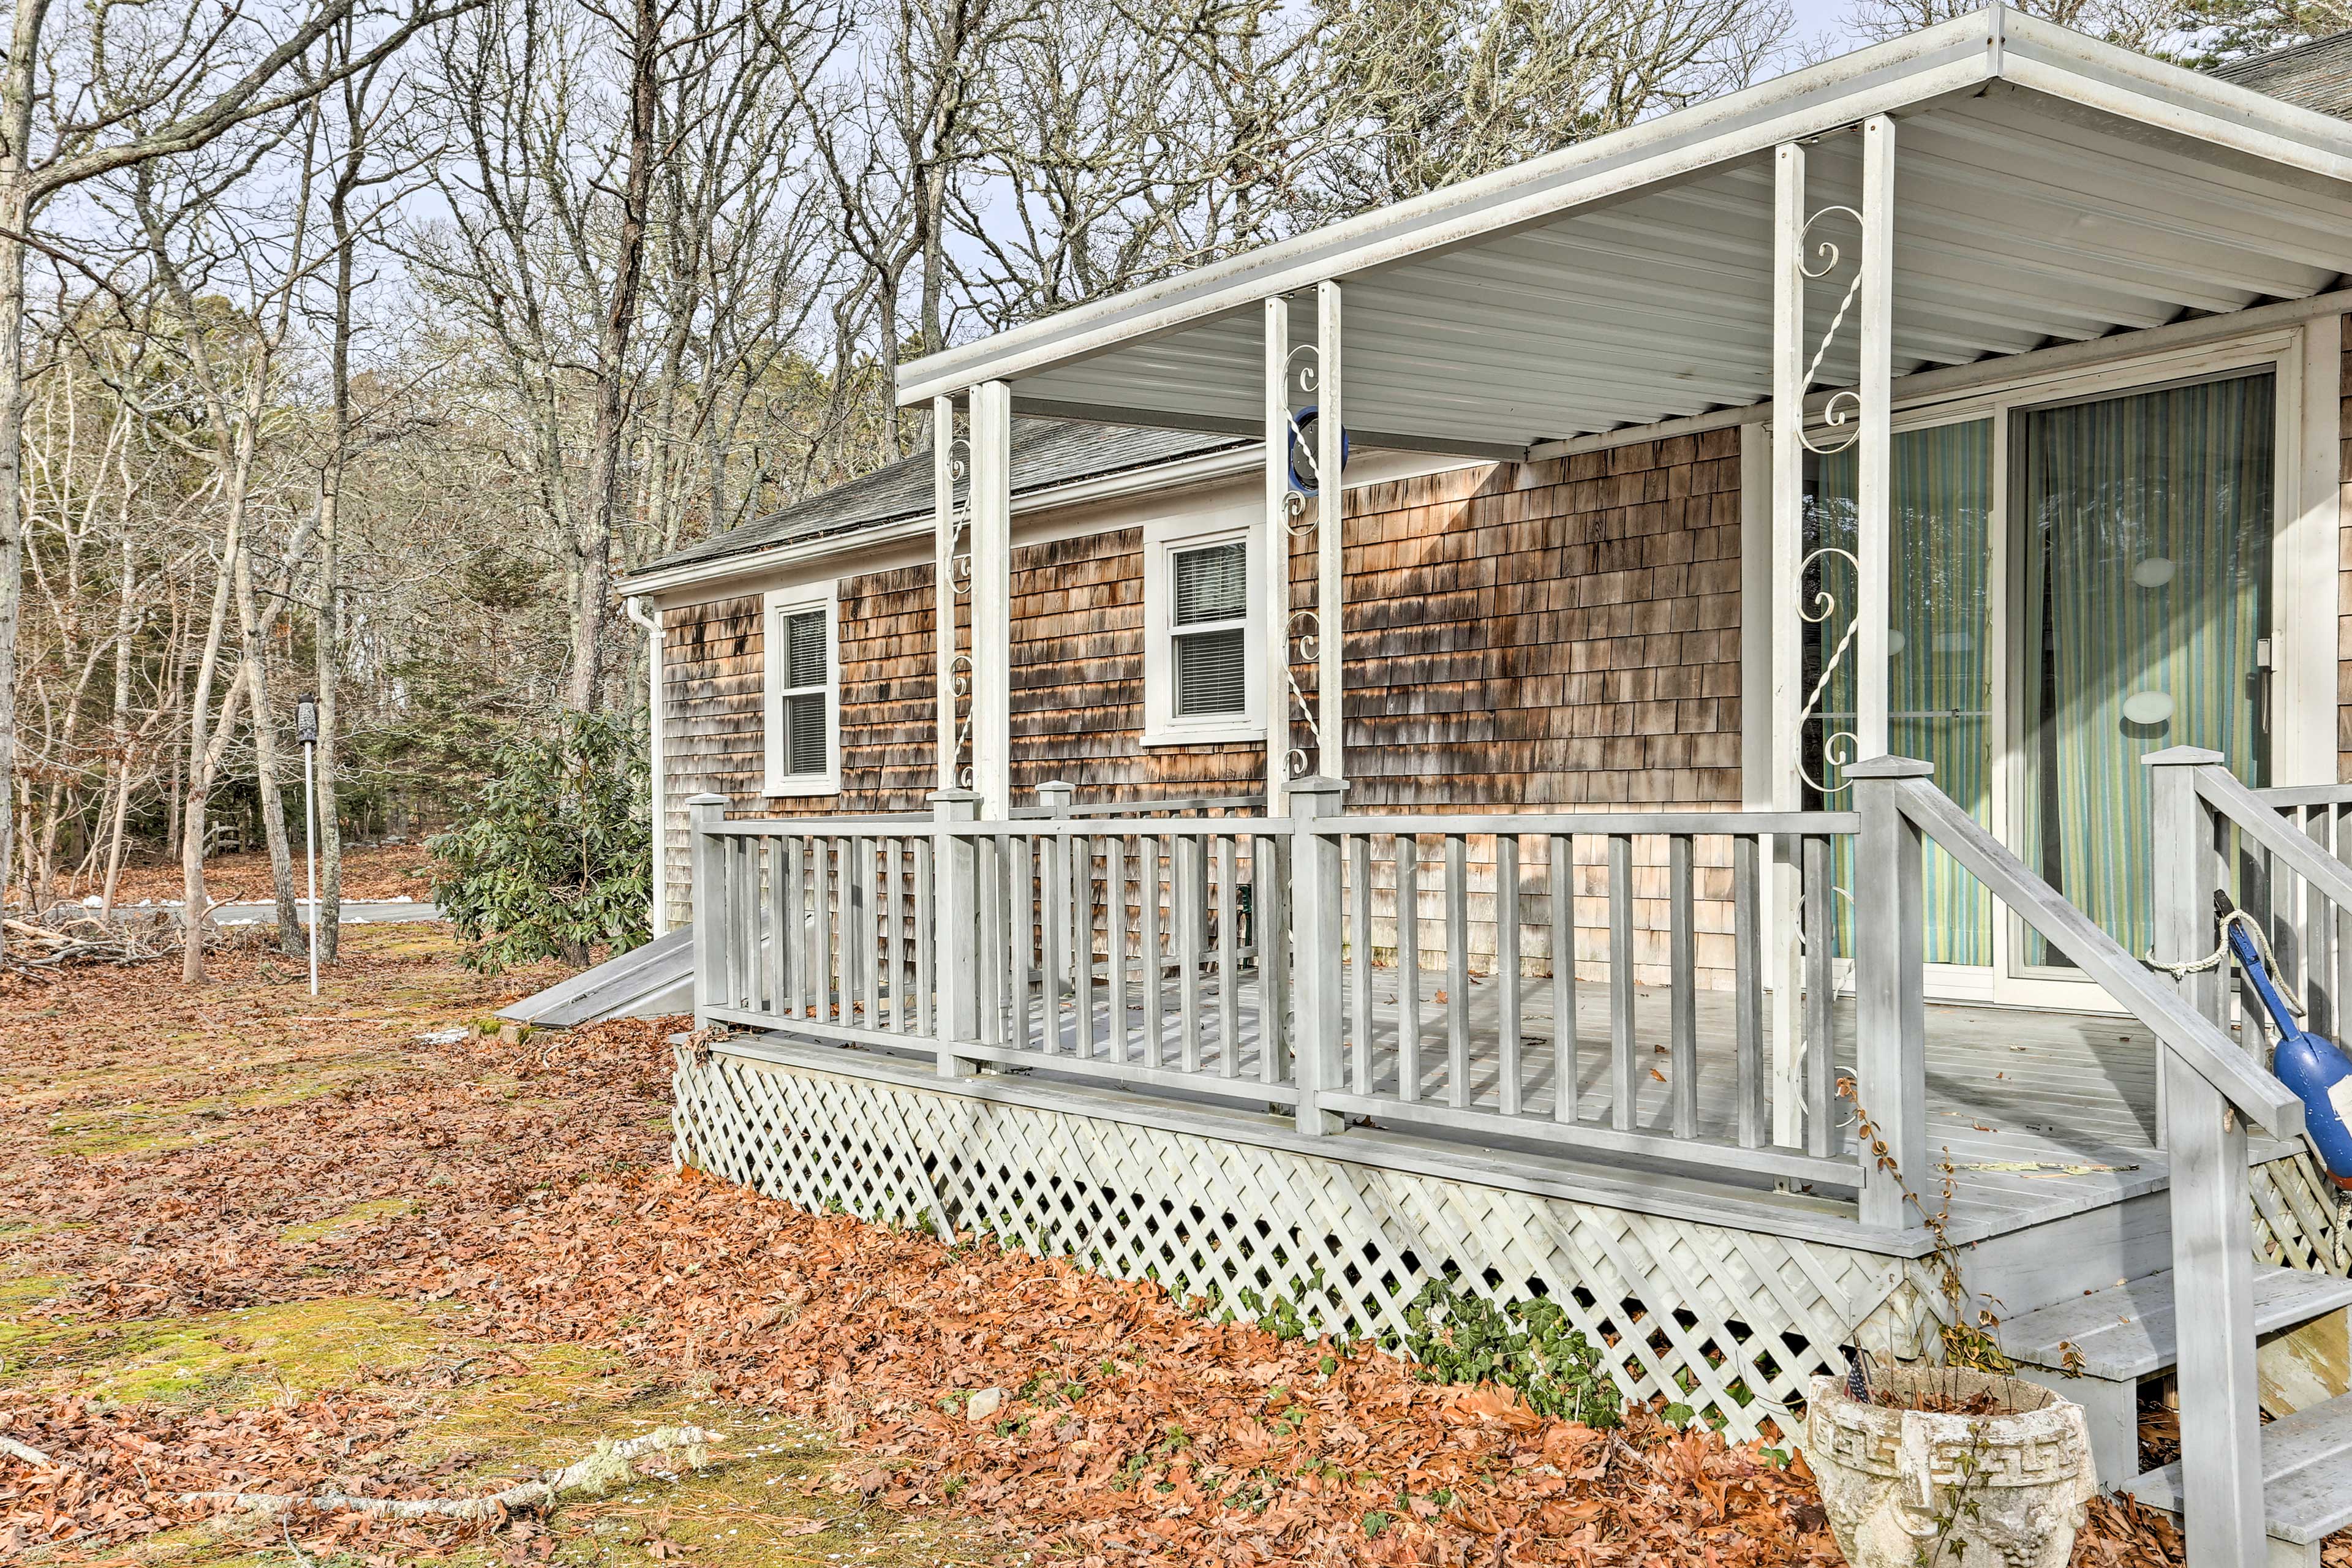 This home is centrally located to Orleans, Brewster, Harwich, Chatham and Dennis